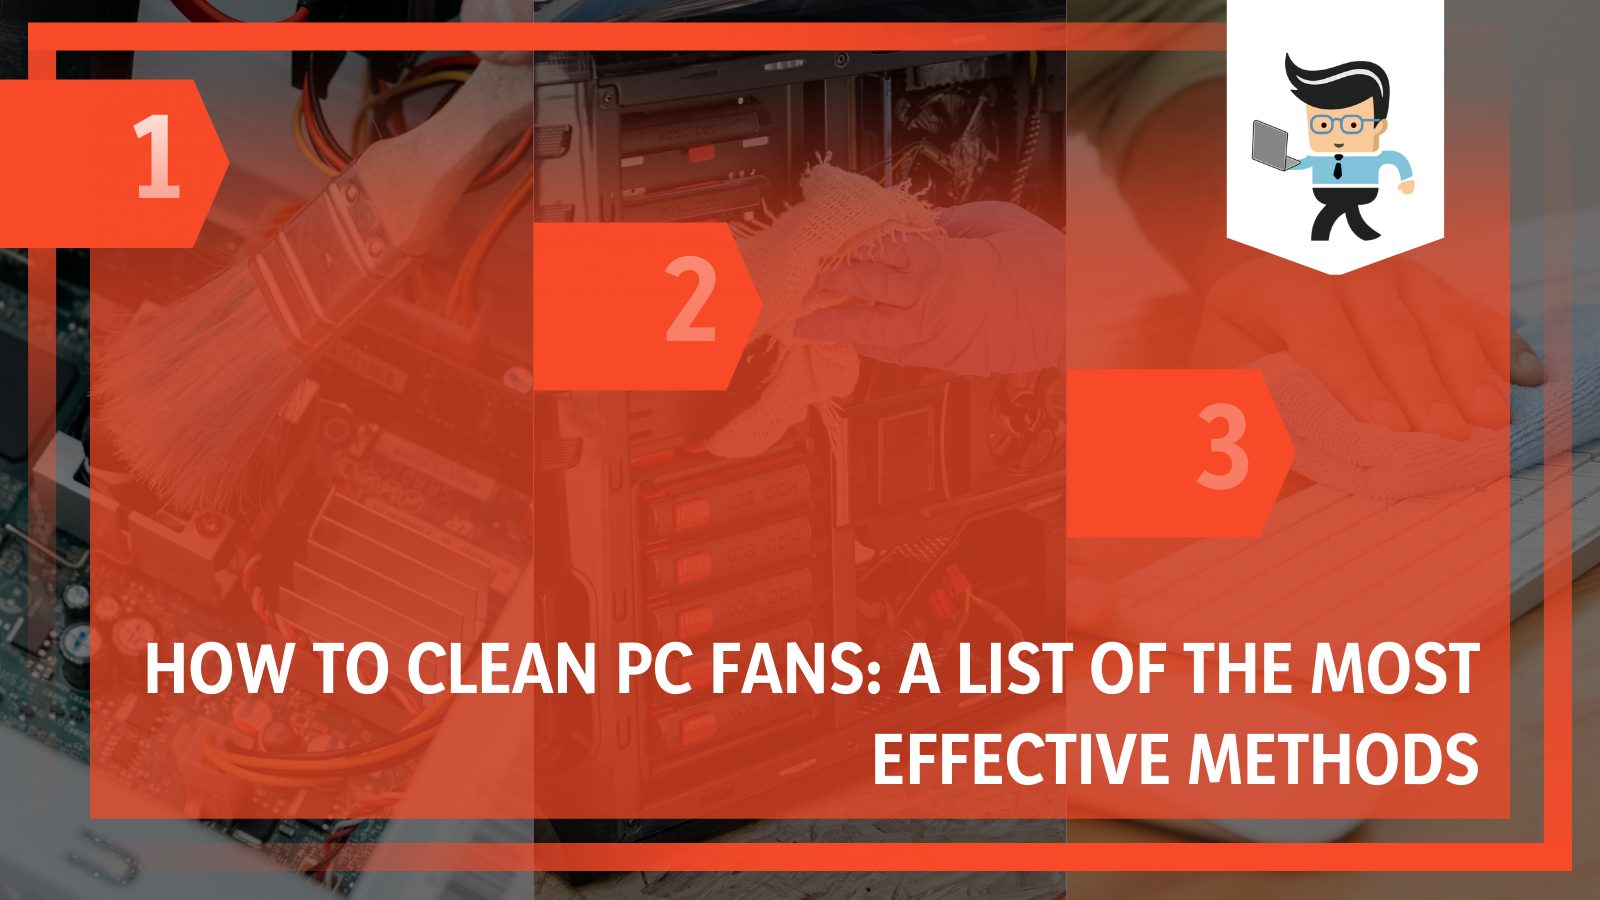 How To Clean PC Fans